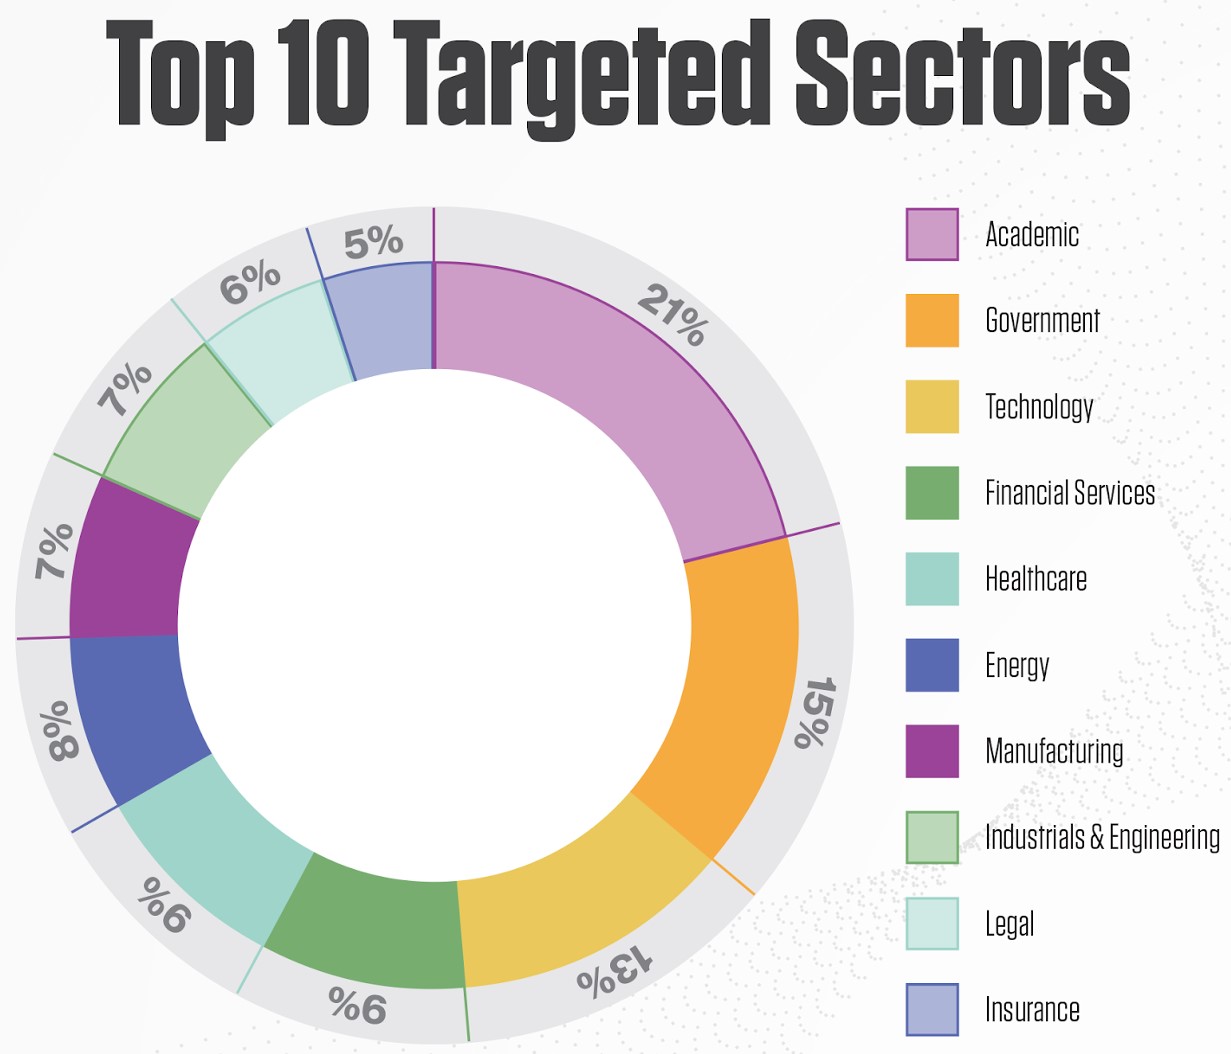 Top 10 targeted sectors by access brokers